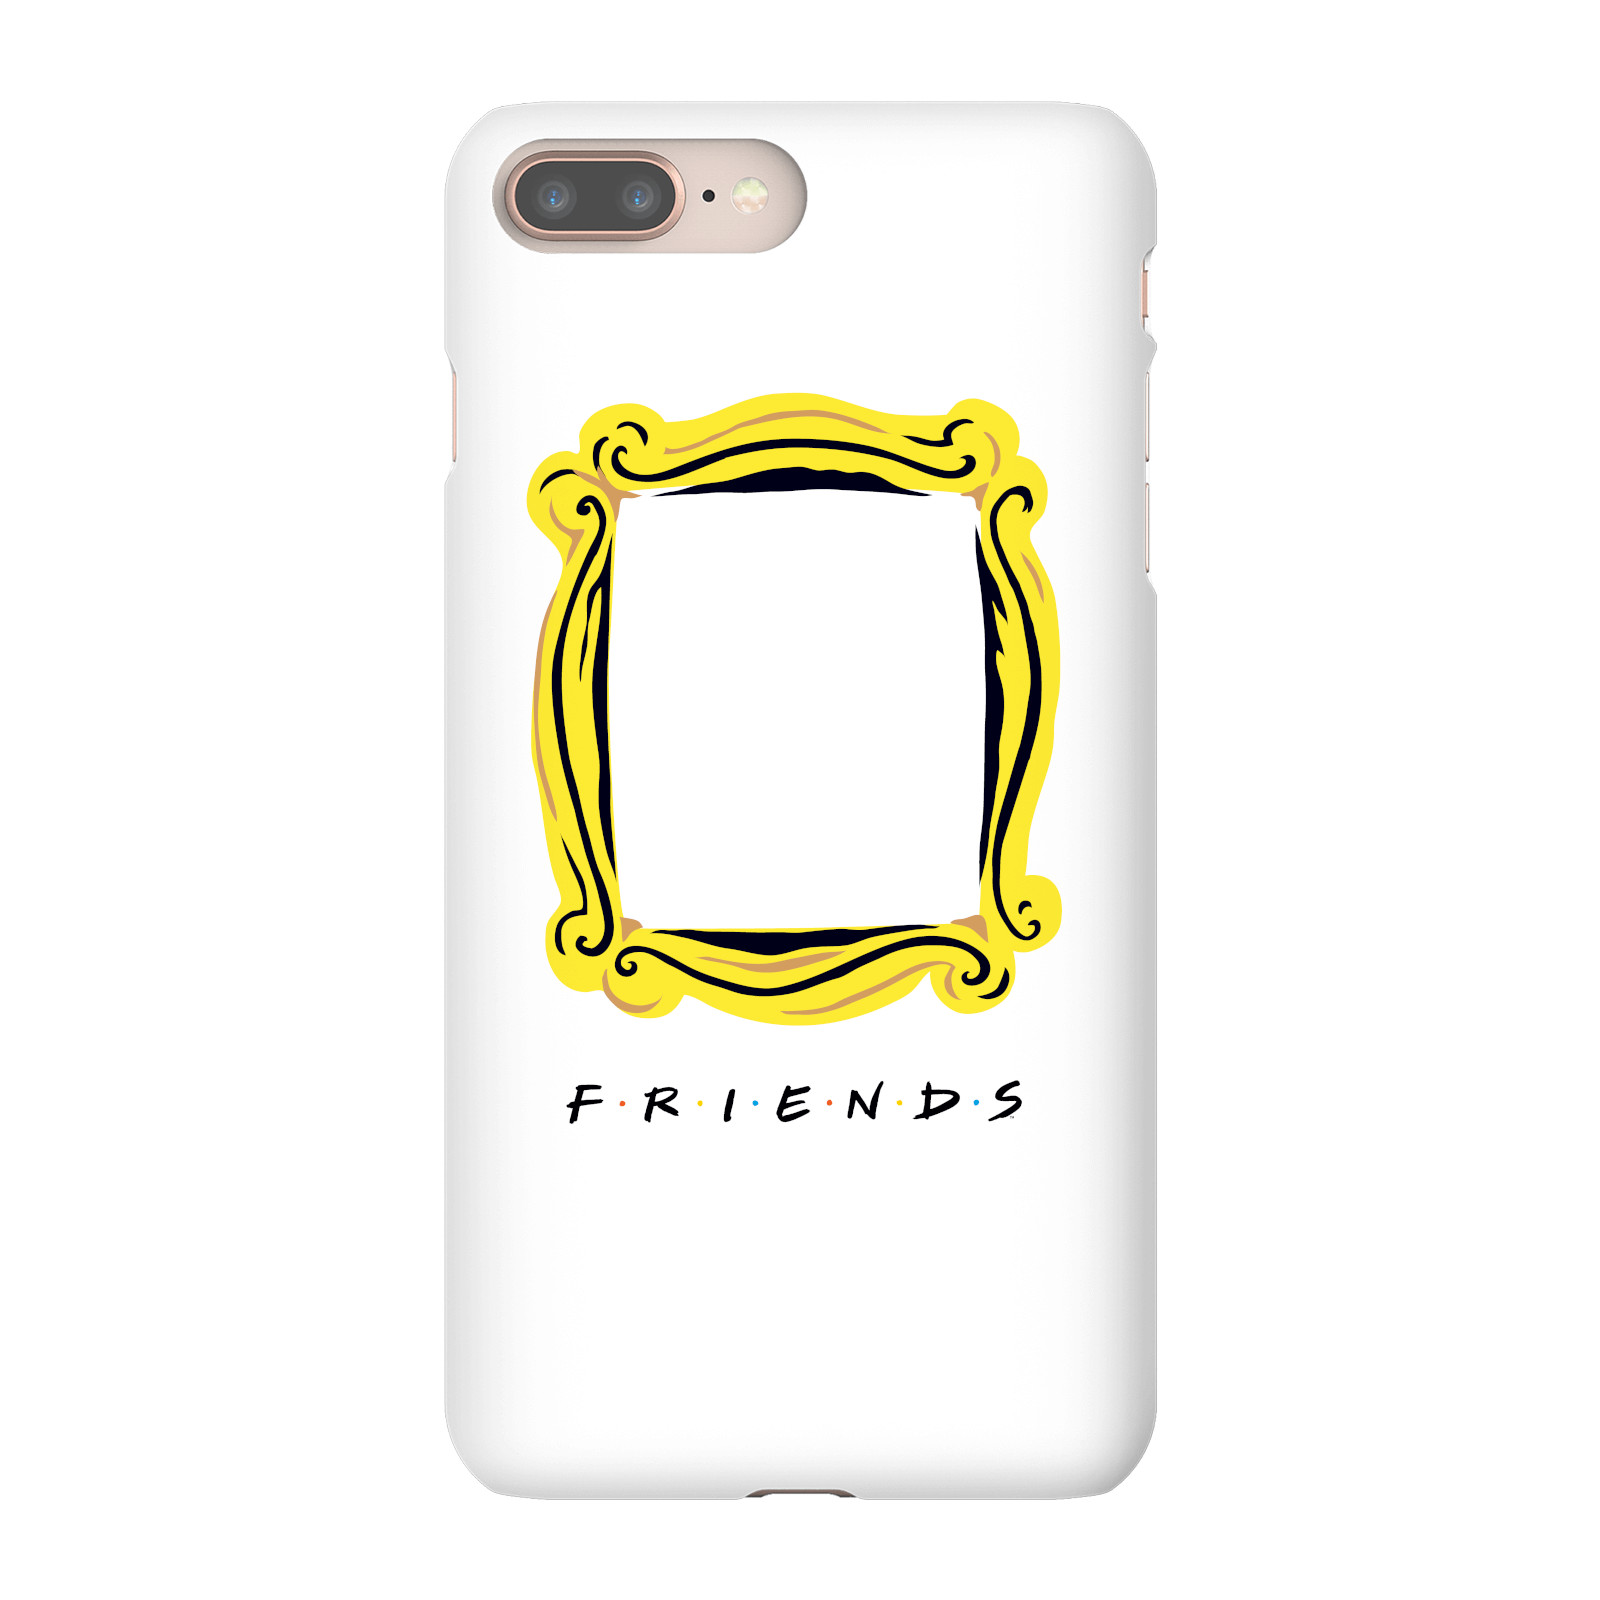 Photos - Case Frame Friends  Phone  for iPhone and Android - iPhone X - Snap  - M 